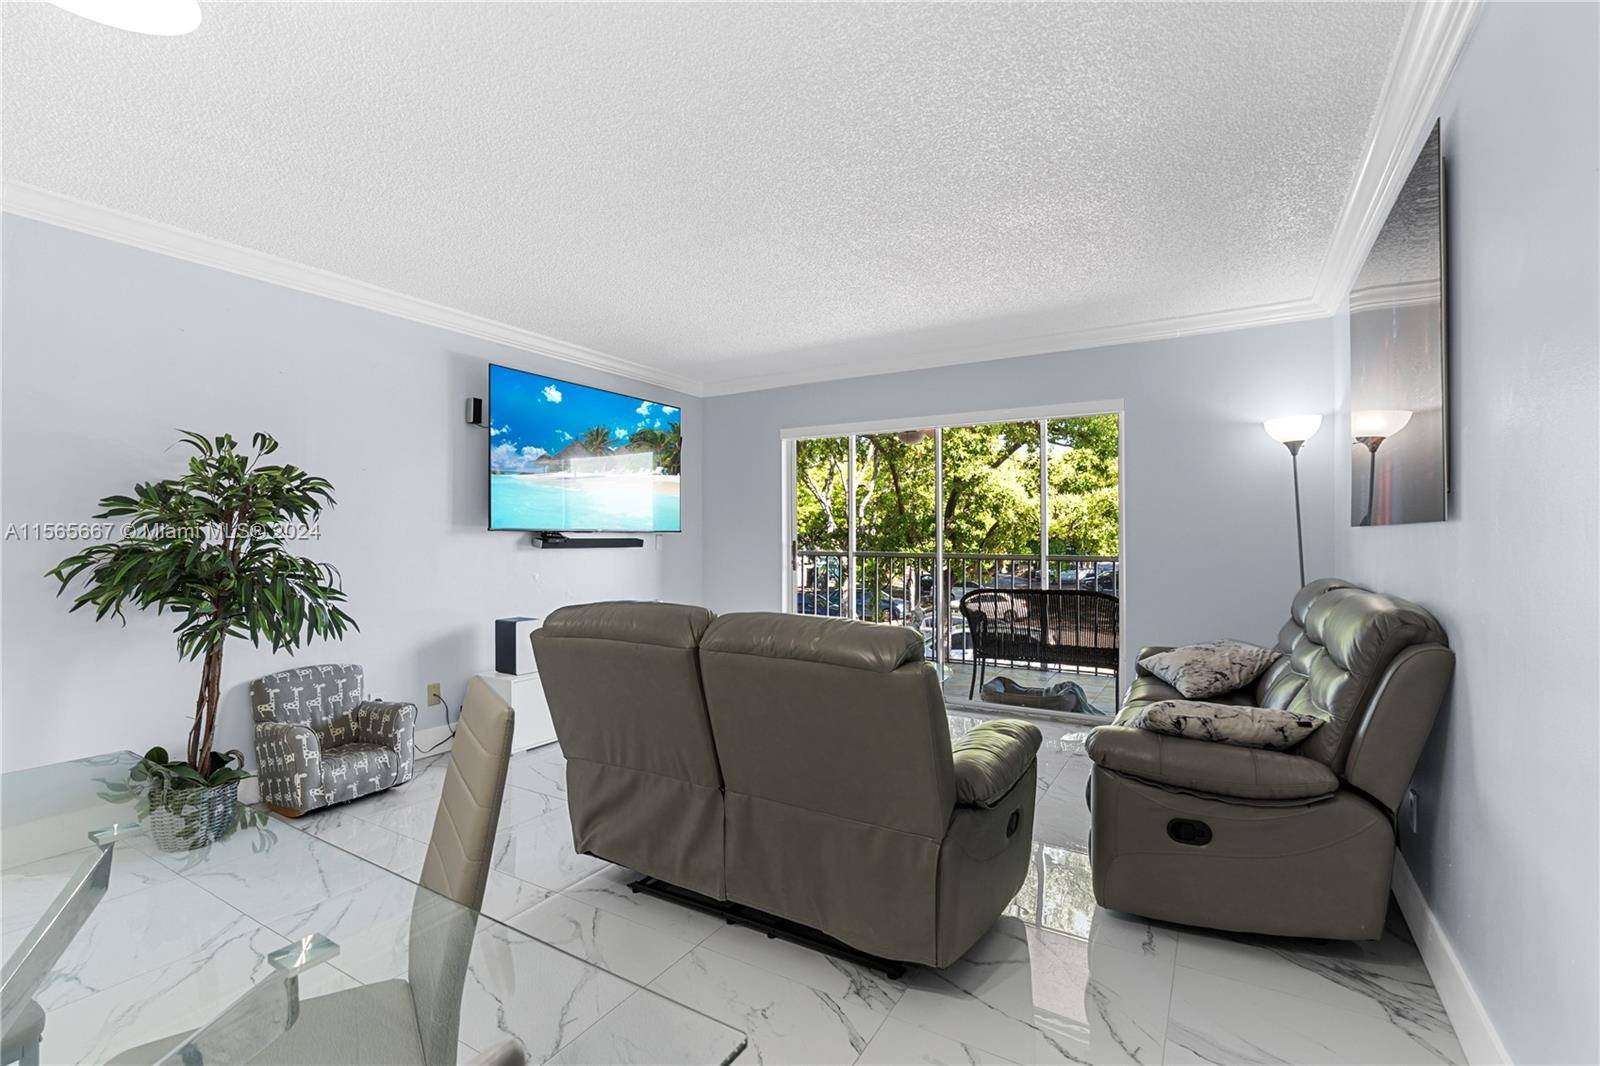 Welcome Home ! This Property nestled in the heart of Hialeah, FL !